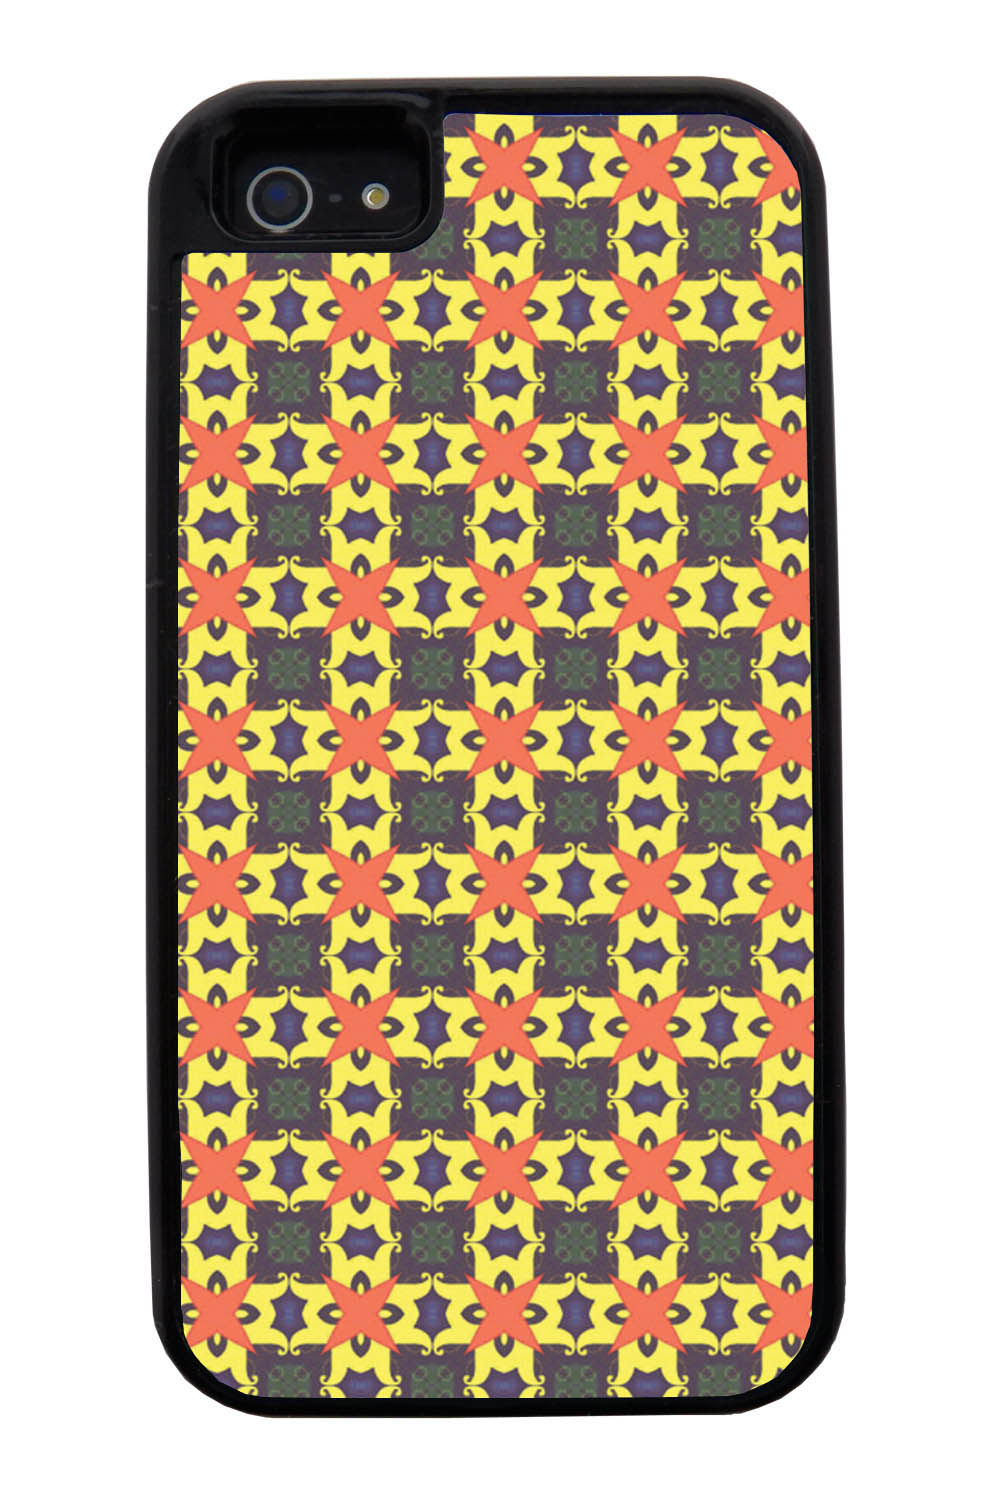 Apple iPhone 5 / 5S Abstract Case - Halloween Colored - Flower Petal Like - Black Tough Hybrid Case